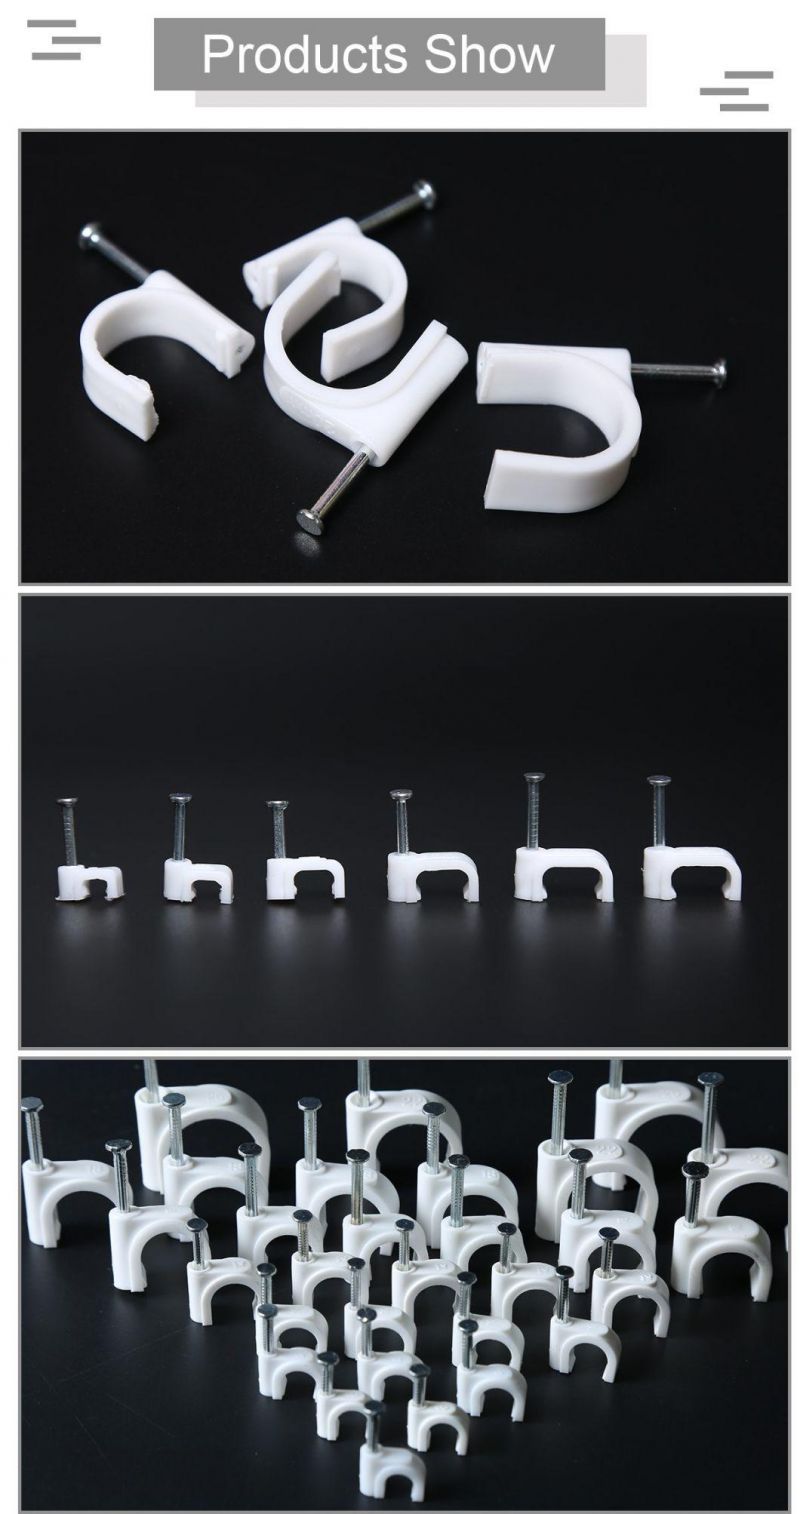 High Quality PE 5 mm Wire Nail Cable Clip